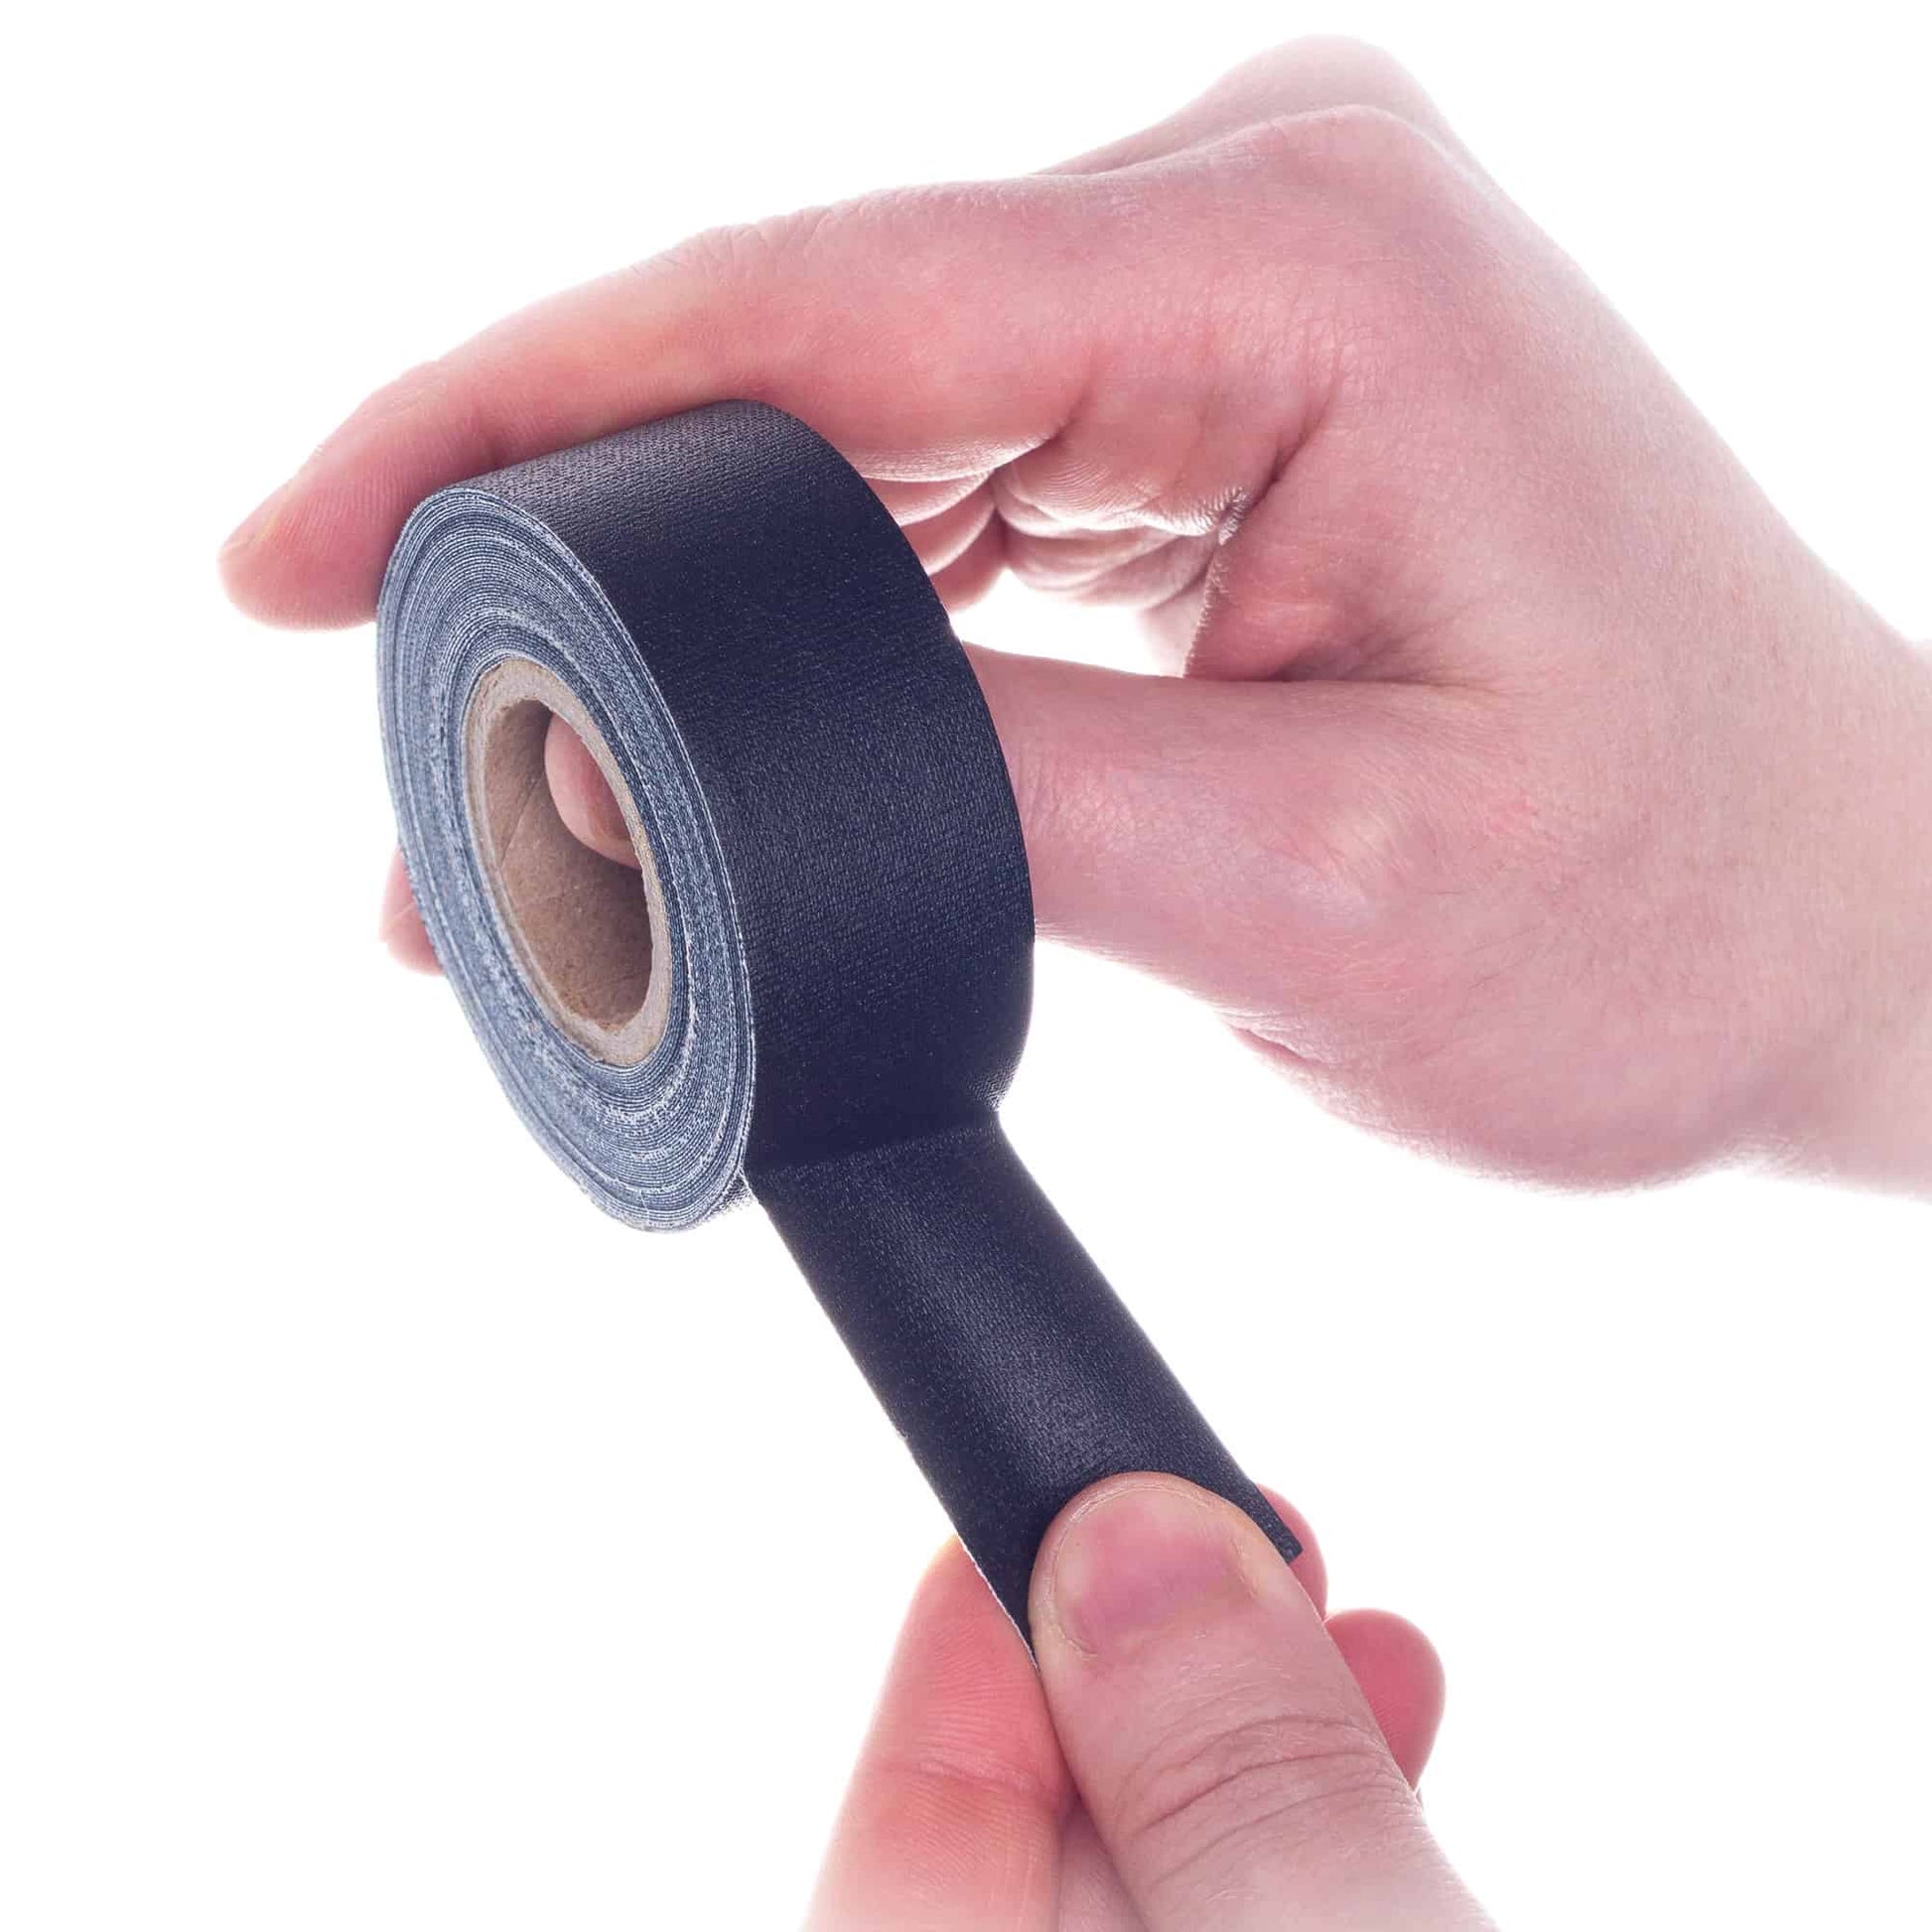 Black Duct Tape 4 inch wide x 60 yard Roll